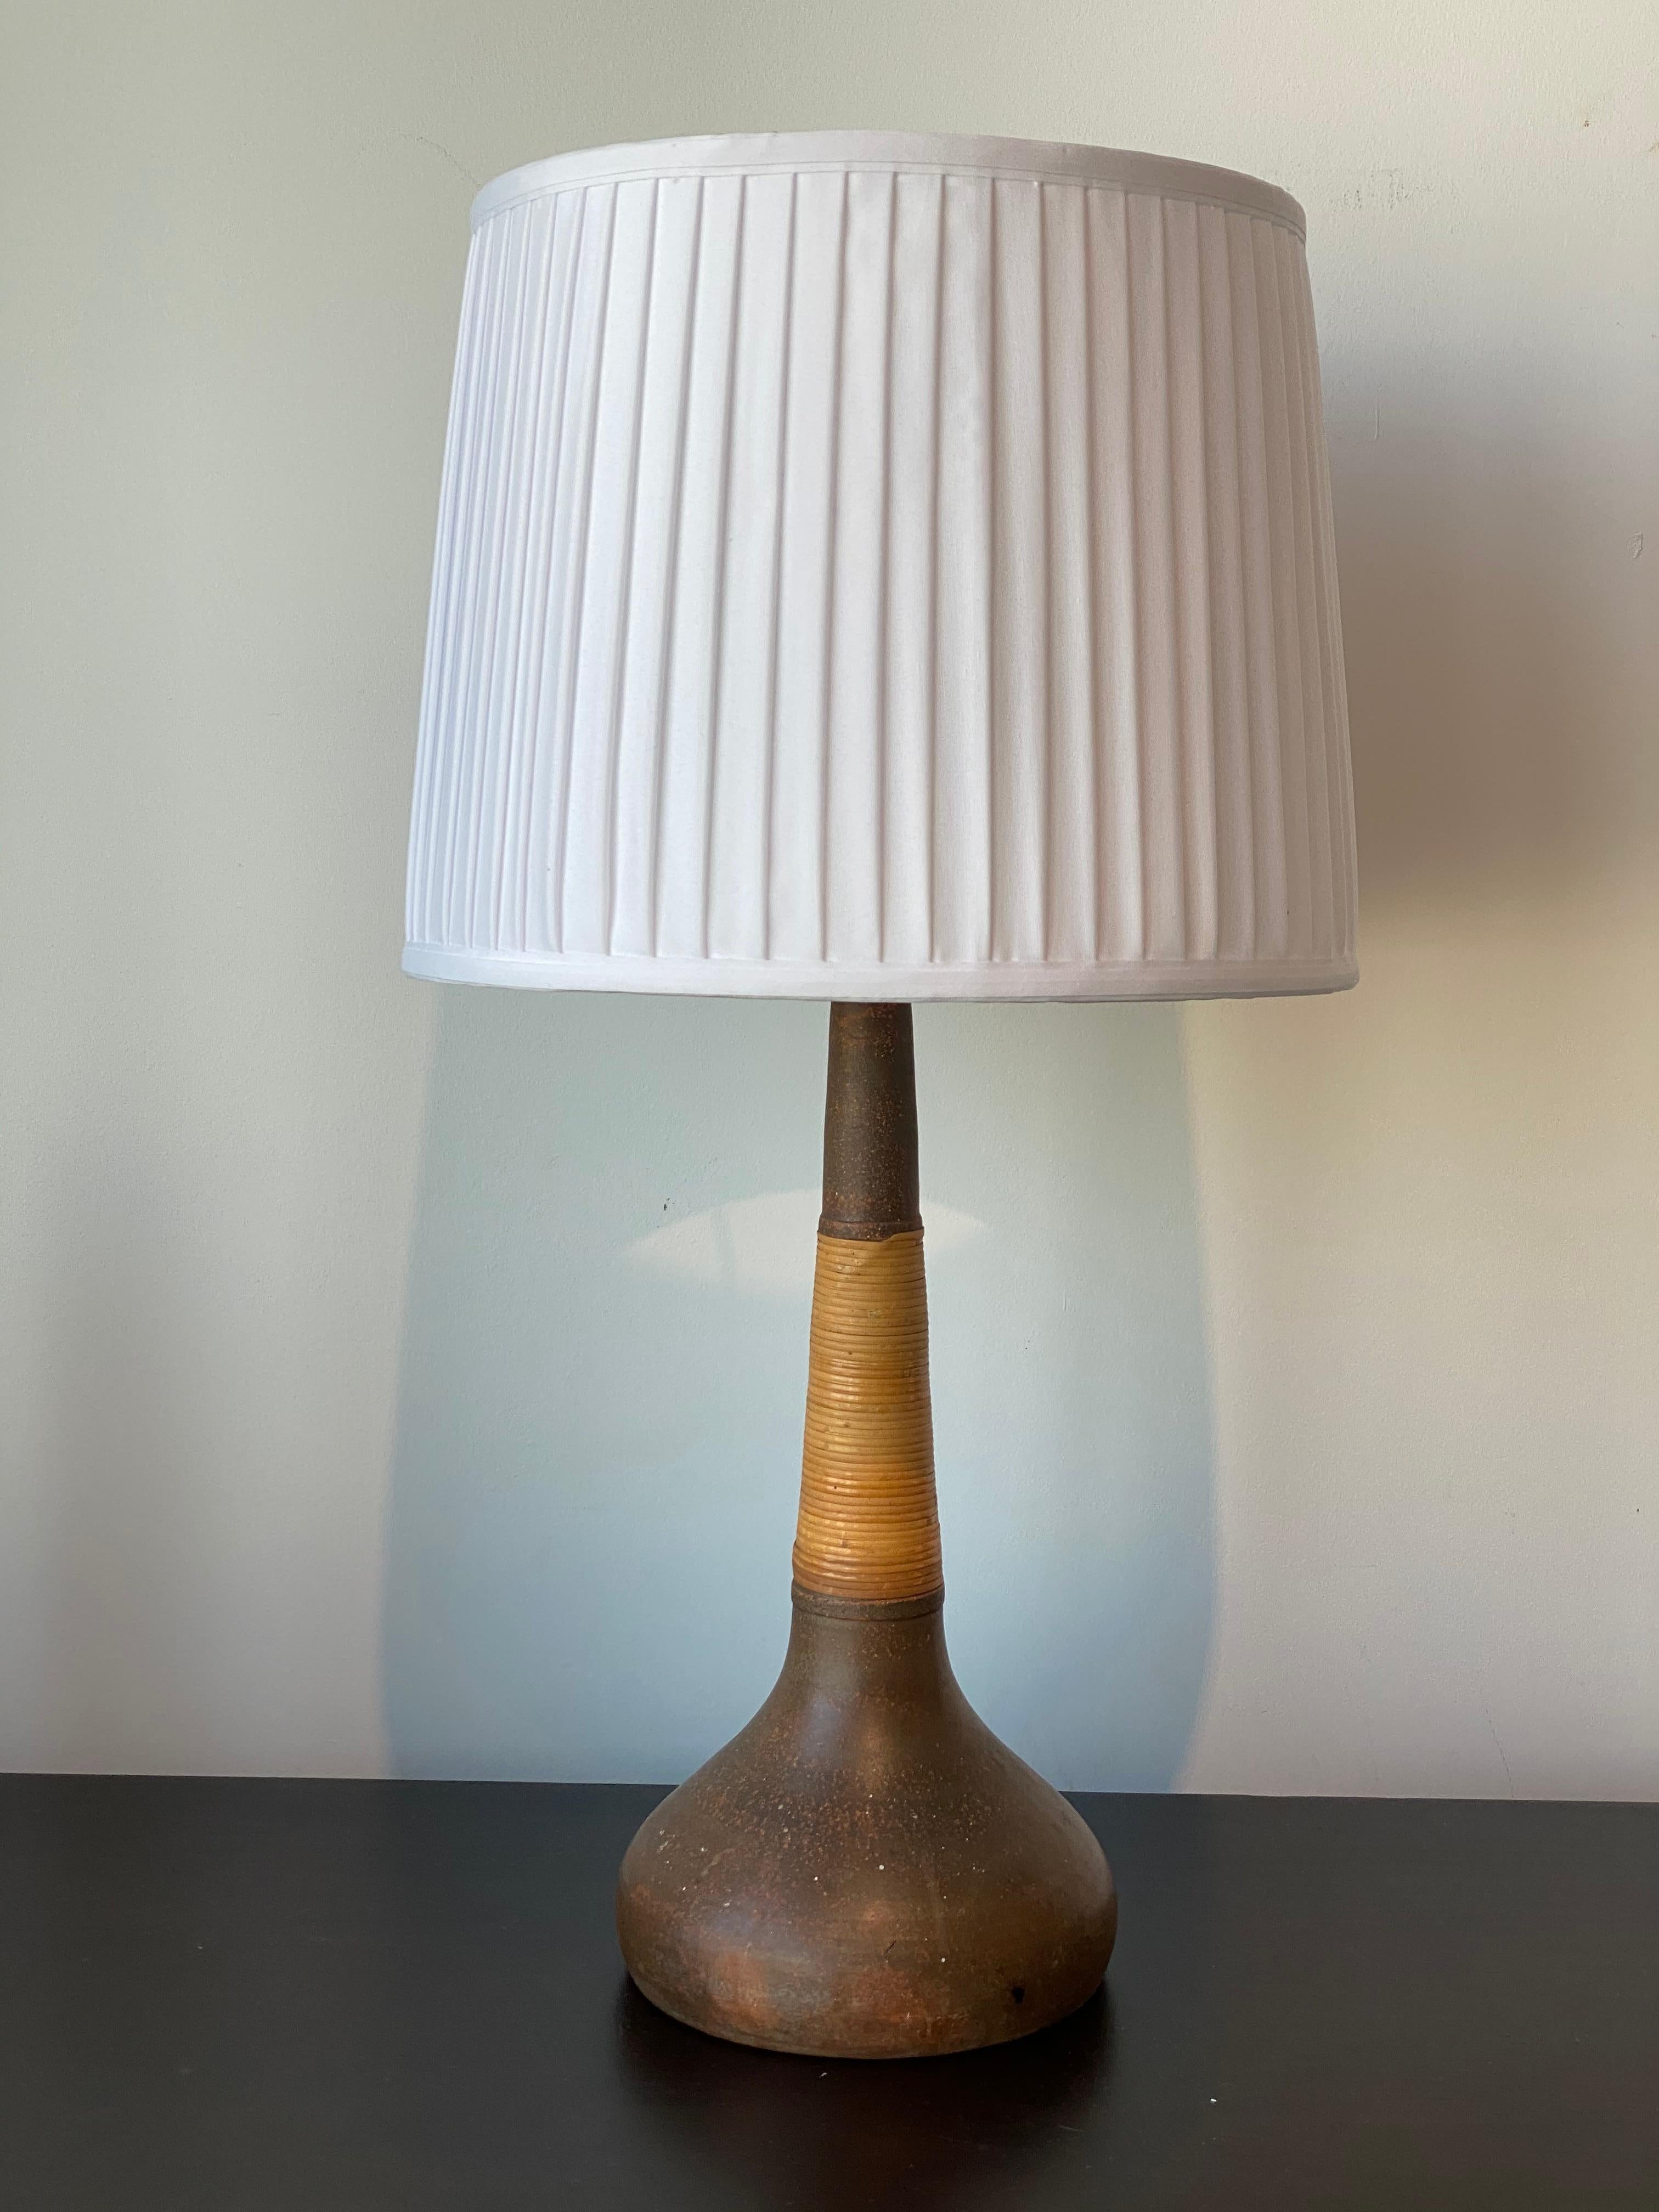 A table lamp designed by Nils Kähler. Produced for Le Klint, Denmark, 1950s. In glazed stoneware and wrapped cane. 

Purchase does not include lampshade. Please see second image for lamps current configuration.

Other designers of the period